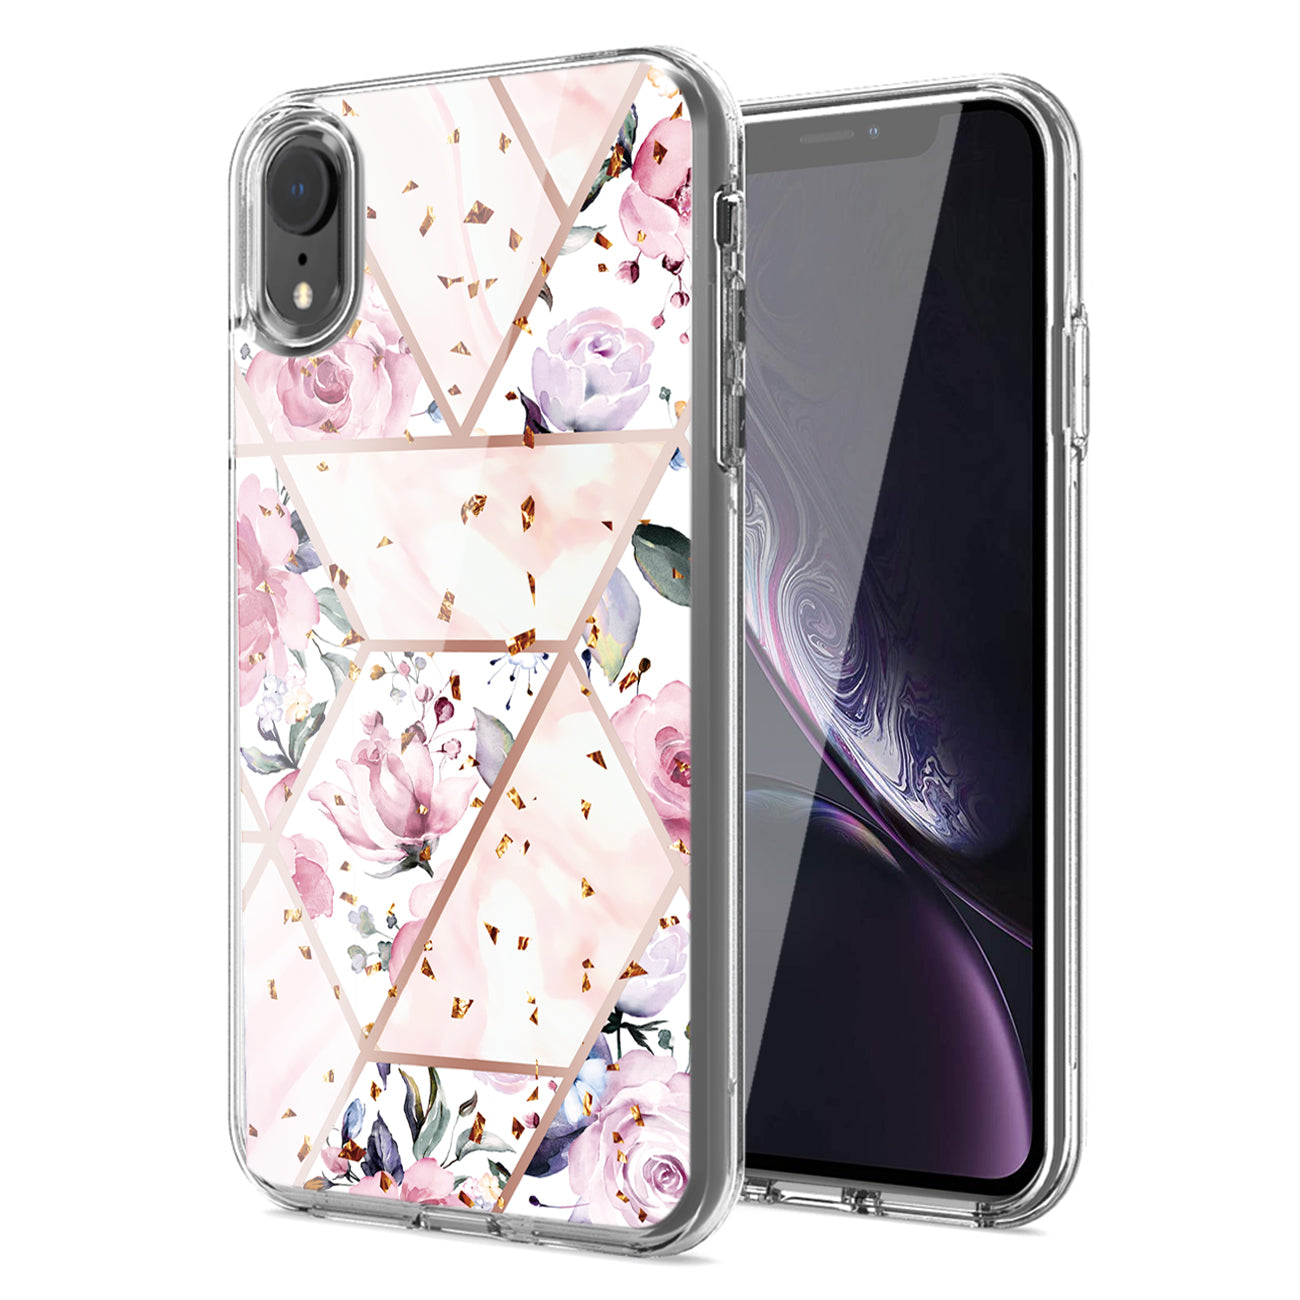 Flower Design Dual Layer Hybrid Hard & Soft TPU Rubber Case for IPH XR In Pink Base Flower